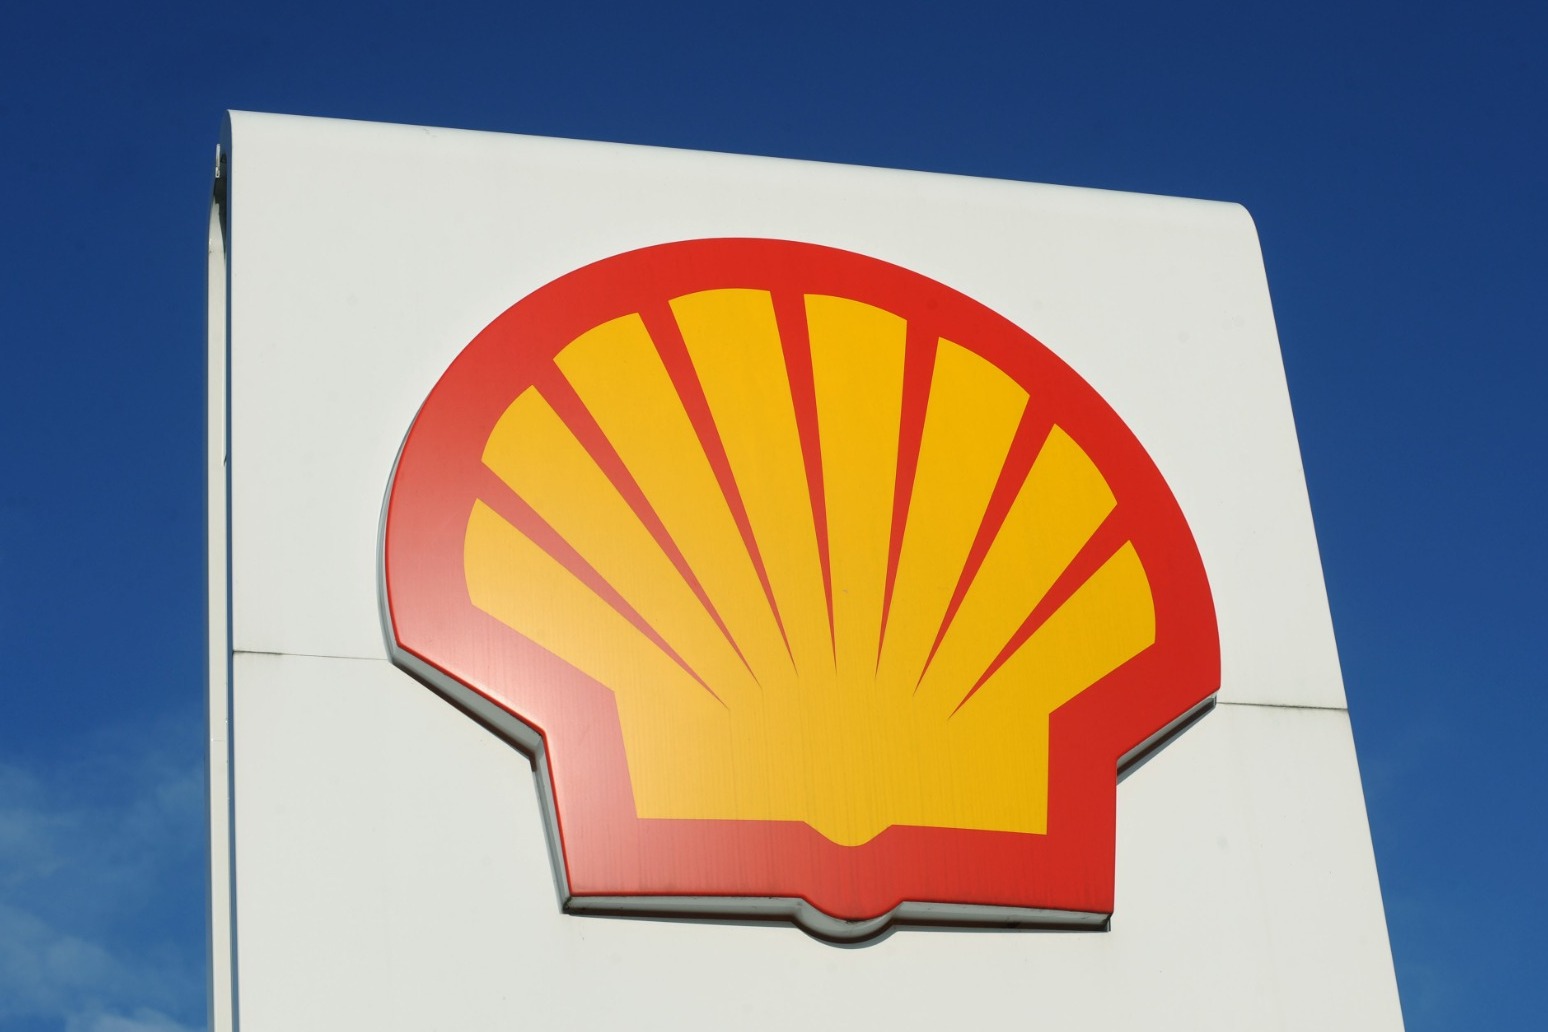 Shell profits expected to dip from recent highs after gas price drop 